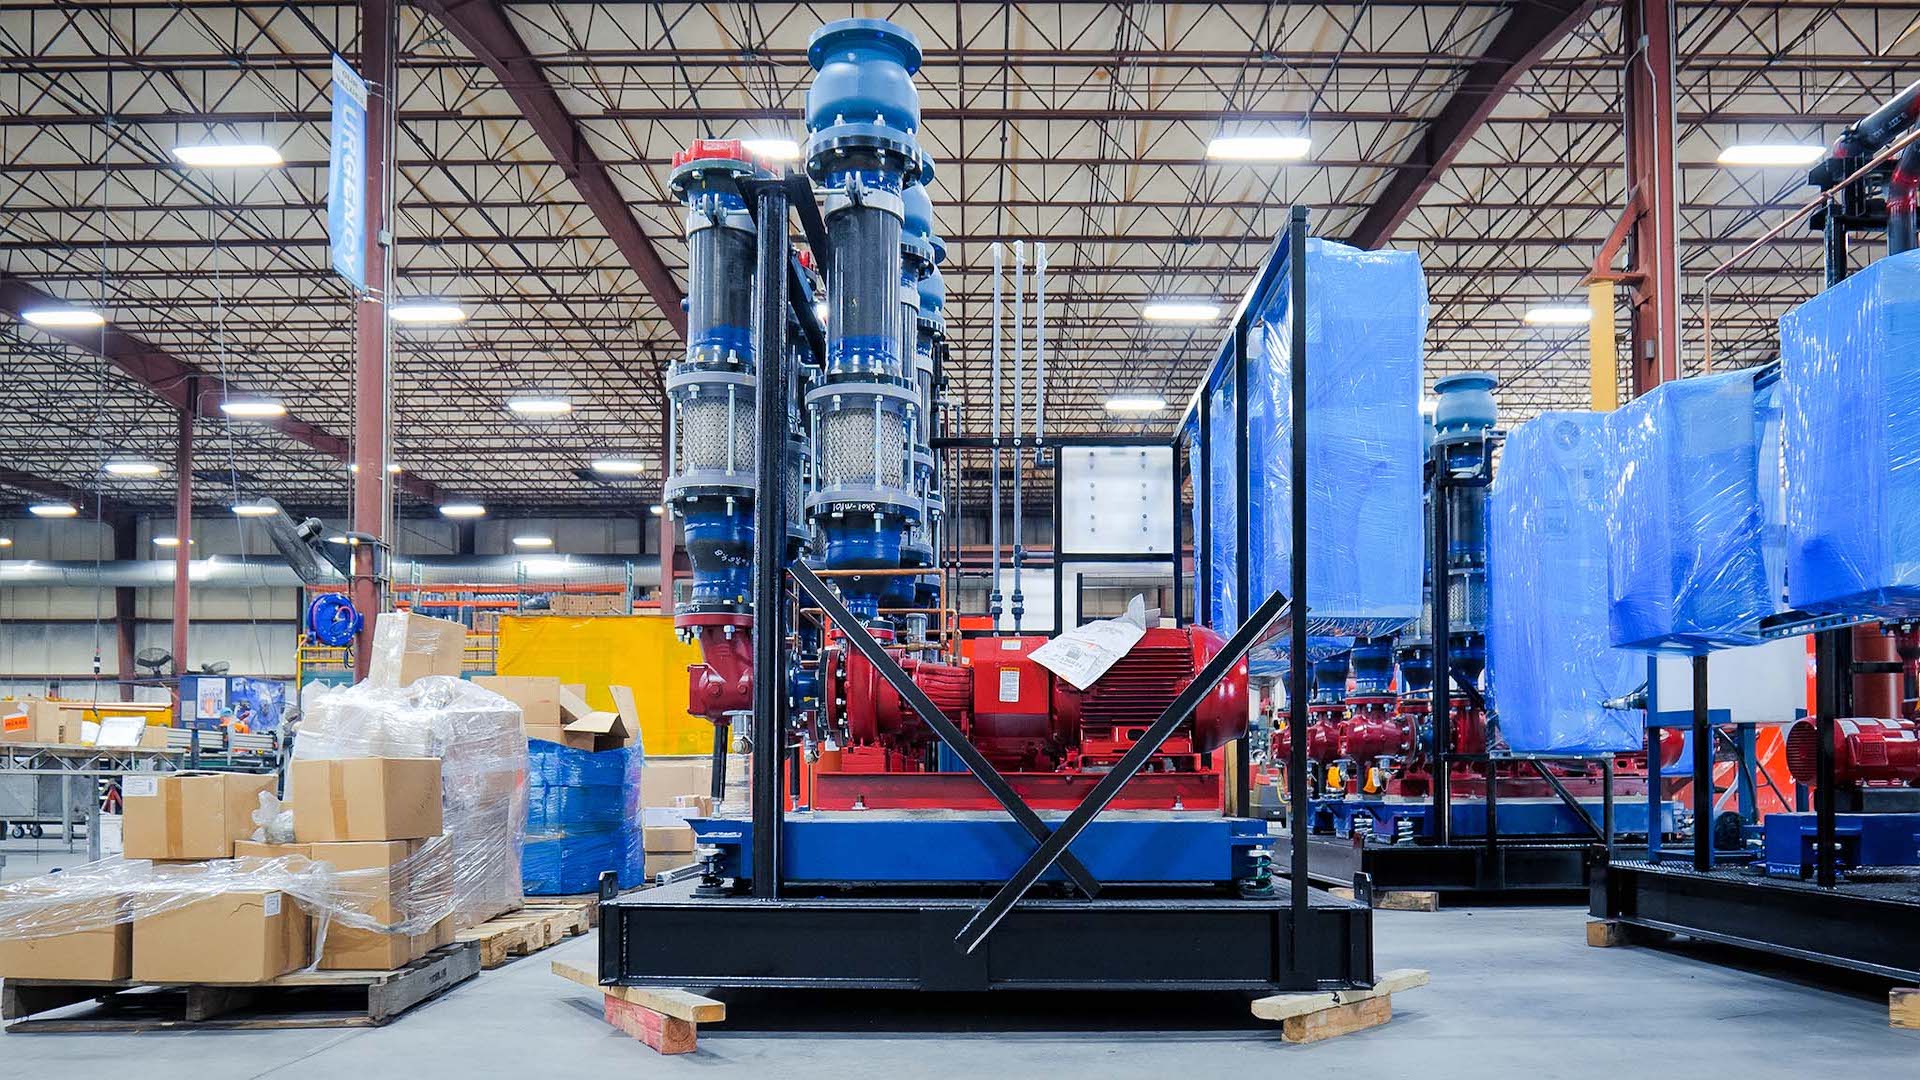 A modular process skid sits on a manufacturing floor